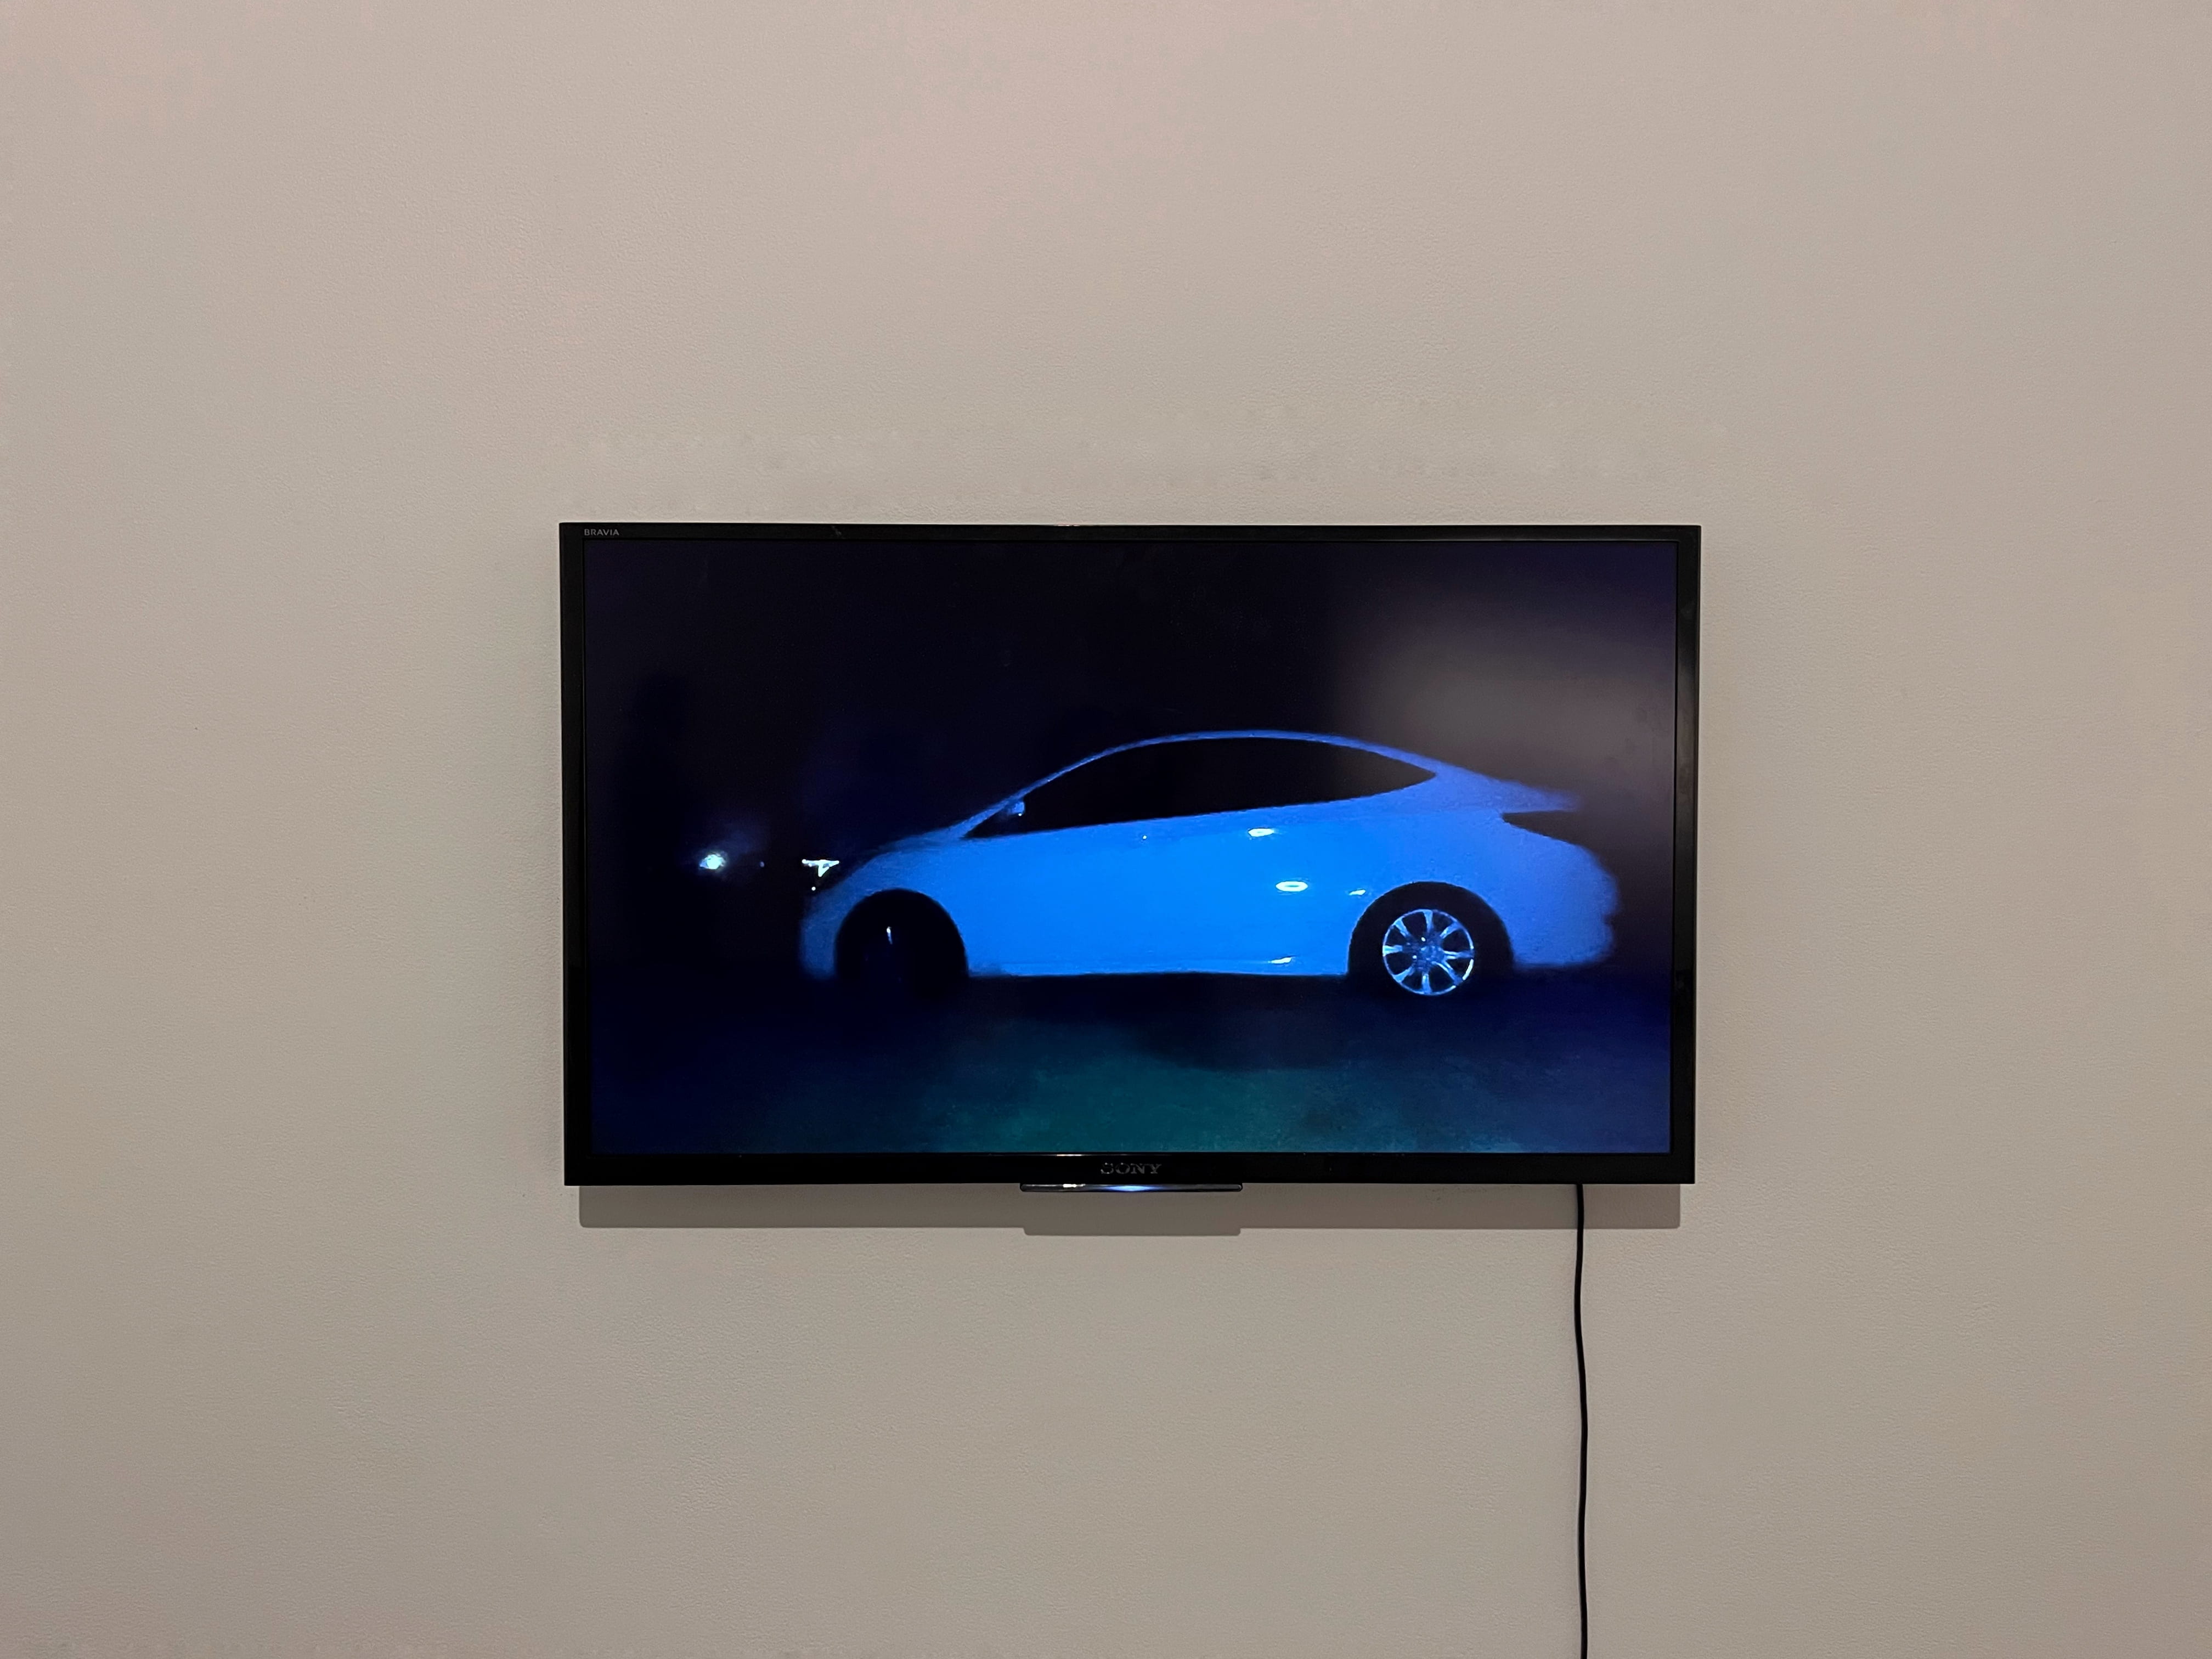 Still image of video work ‘Behind Closed Doors’ presented on wall mounted digital tv monitor.